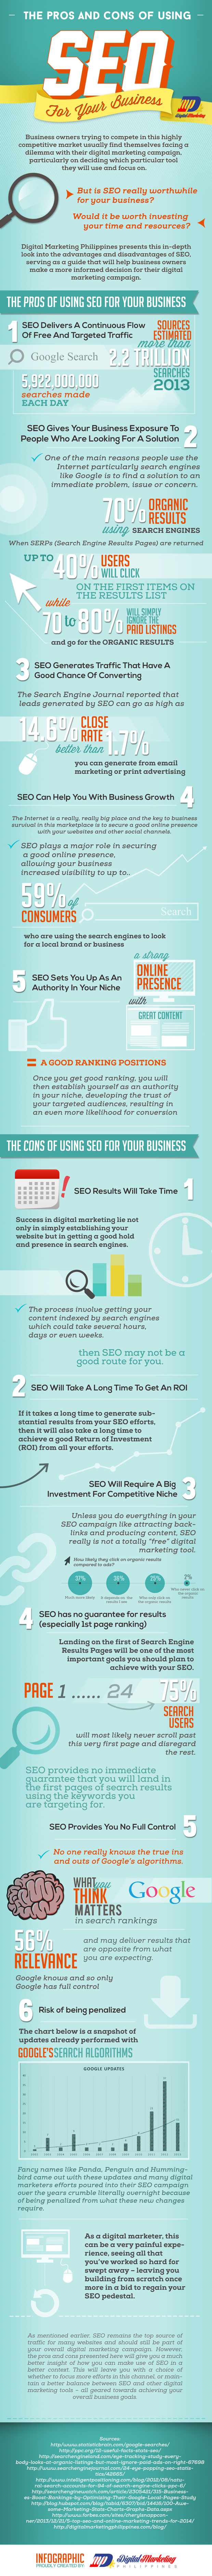 The-Pros-and-Cons-of-Using-SEO-for-Your-Business